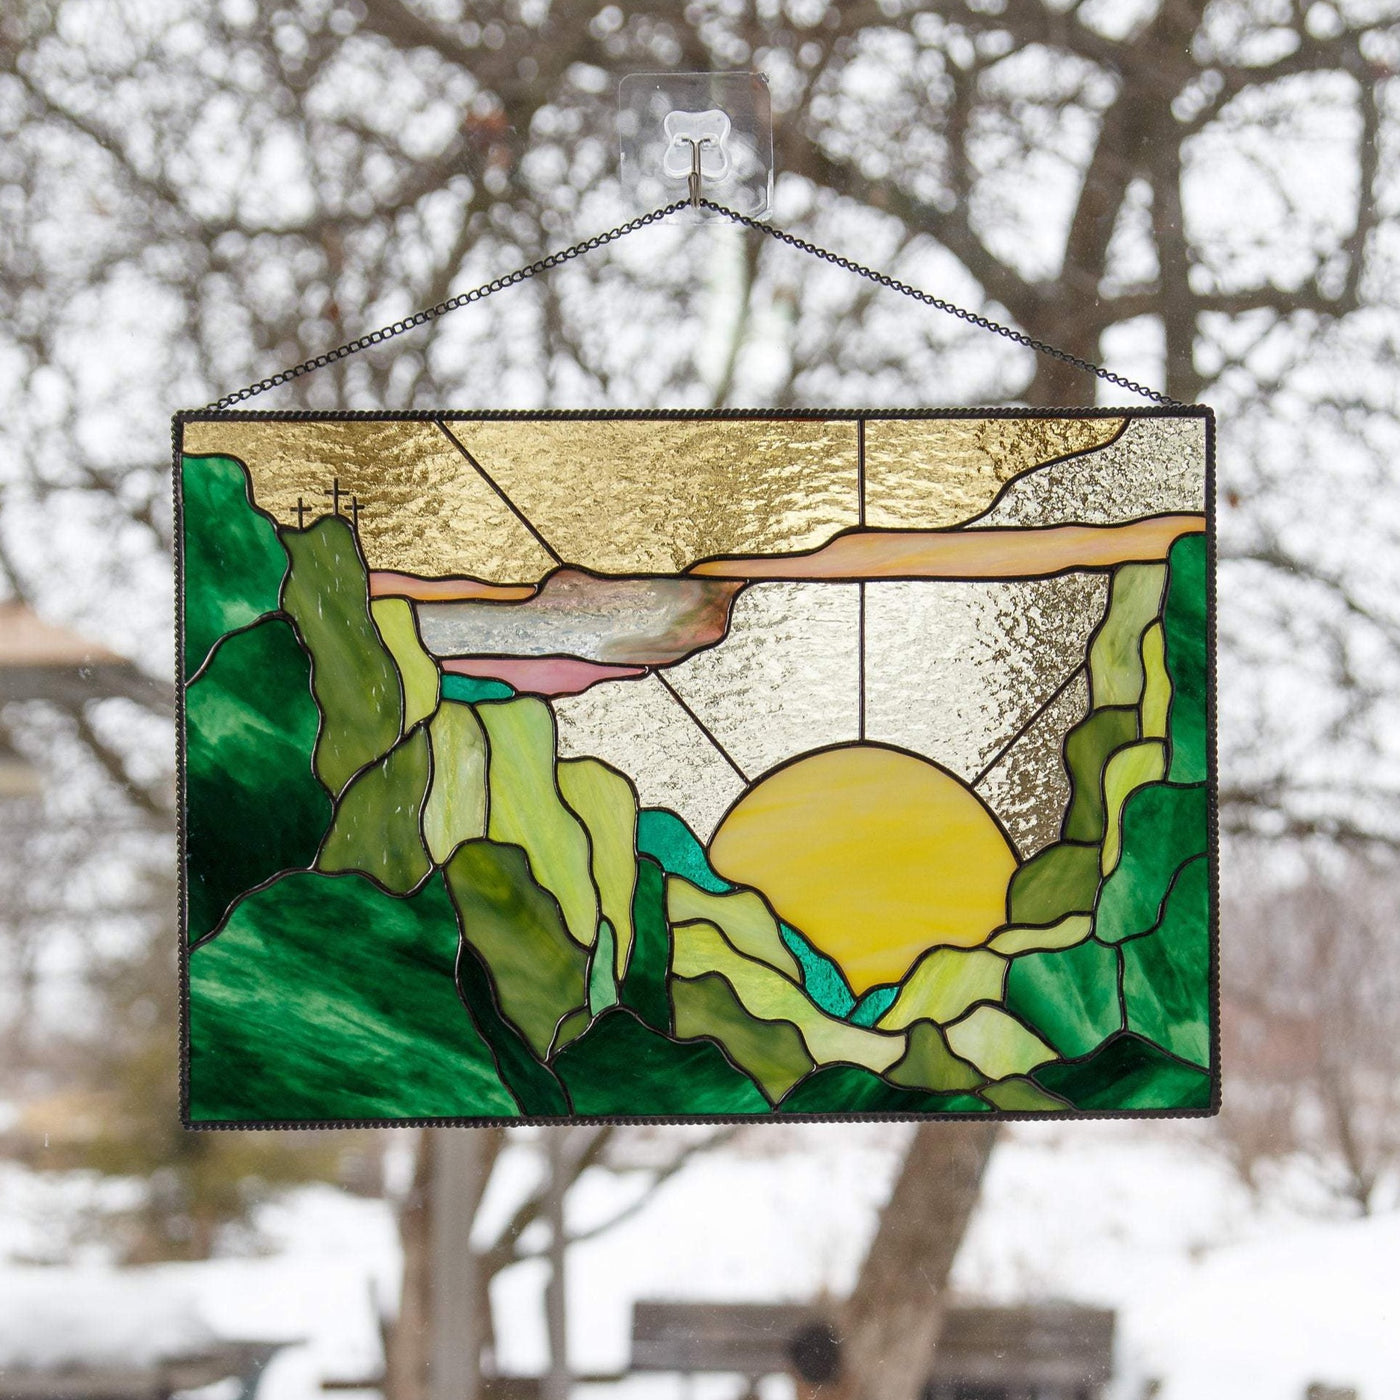 Window hanging of stained glass depicting sunset